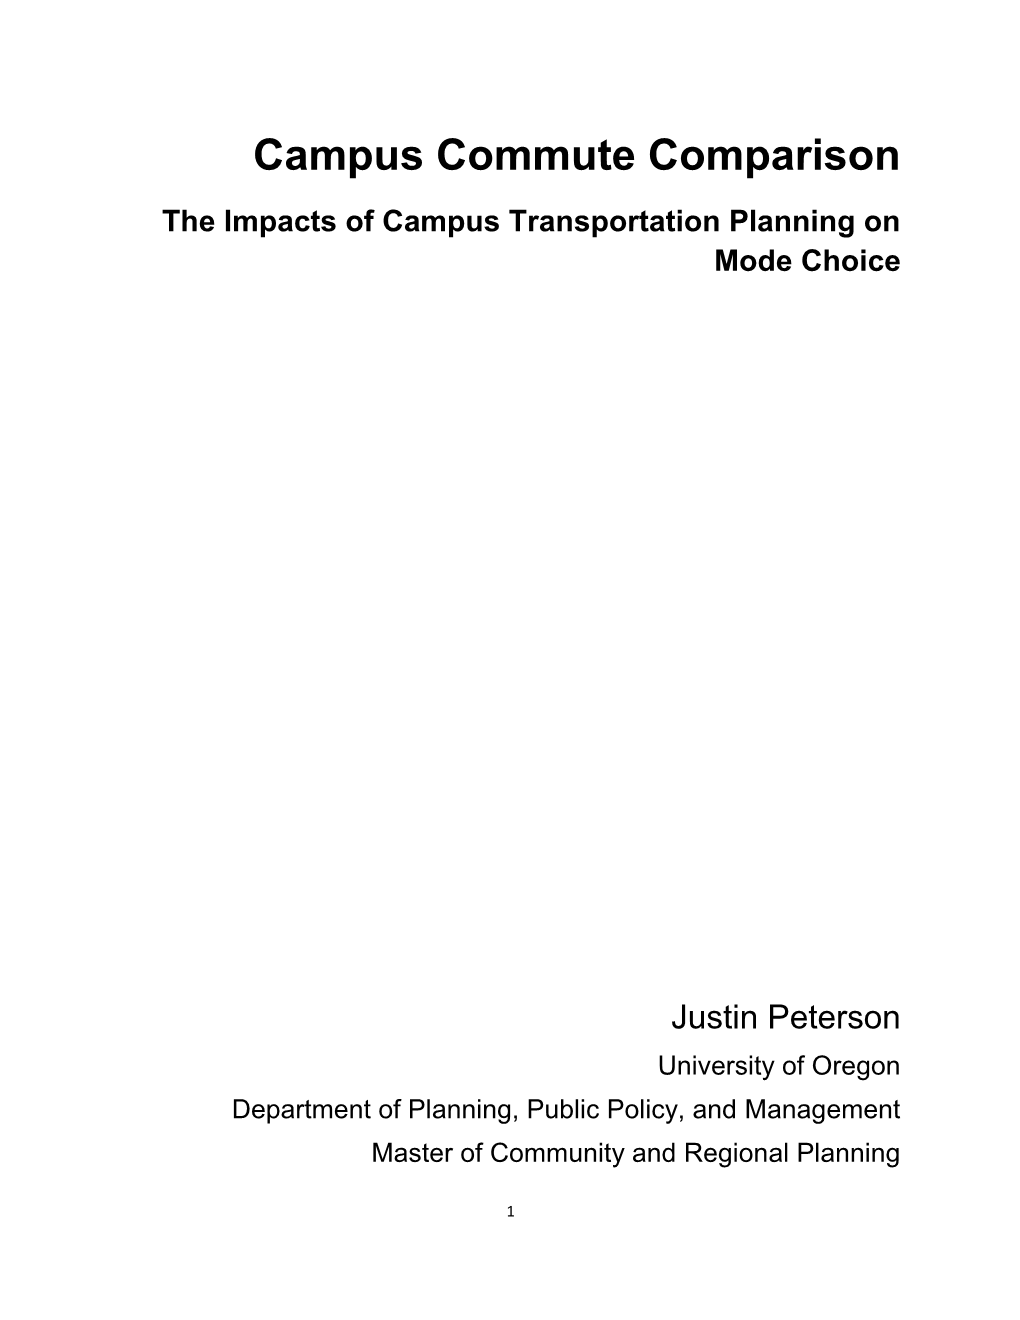 Campus Commute Comparison the Impacts of Campus Transportation Planning on Mode Choice